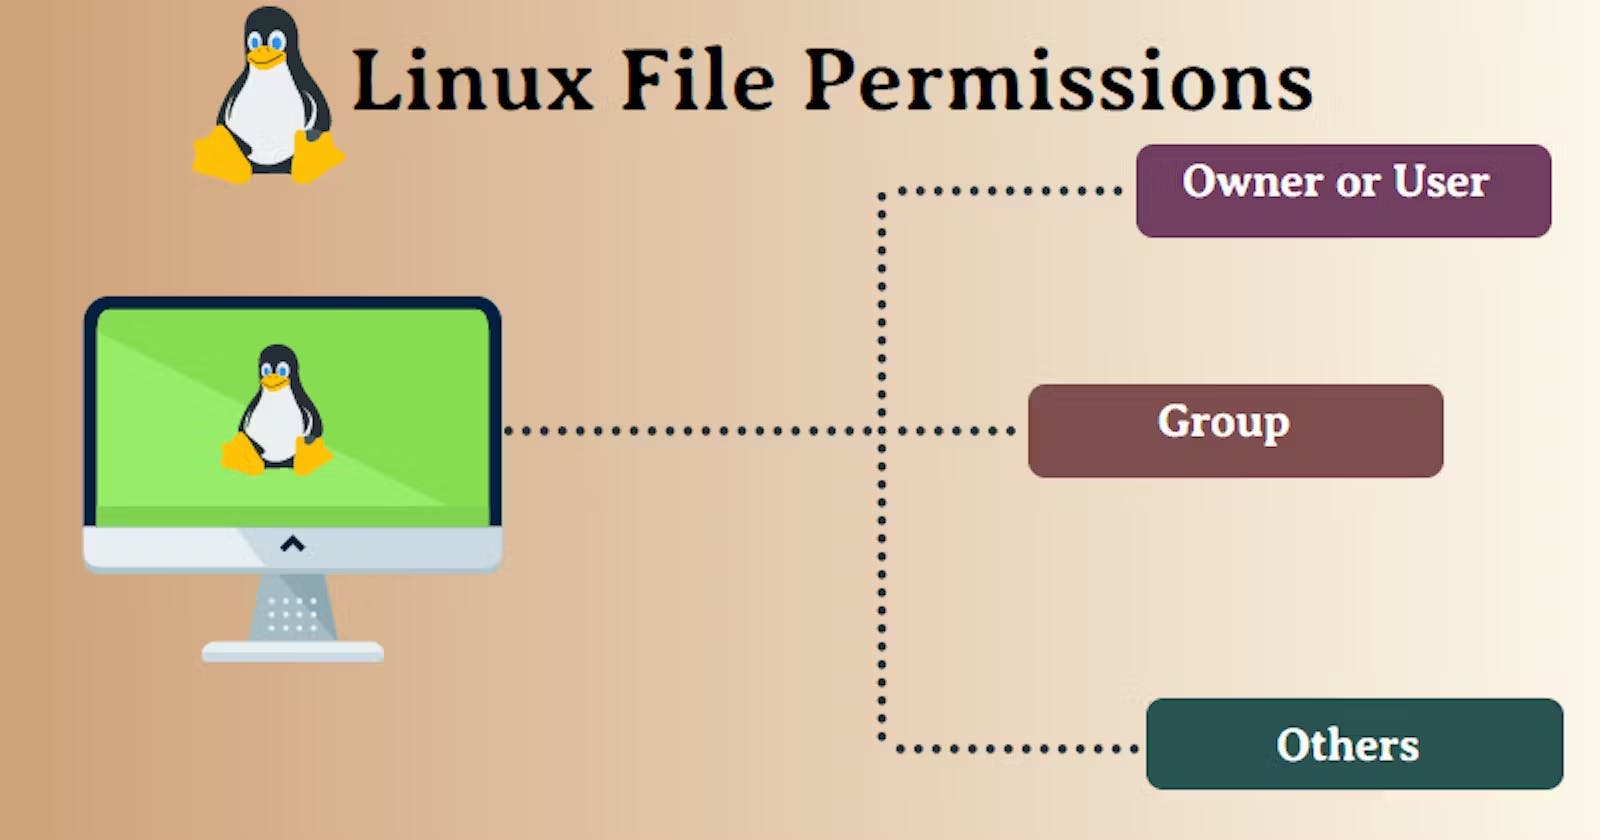 Day 6 Task: File Permissions and Access Control Lists